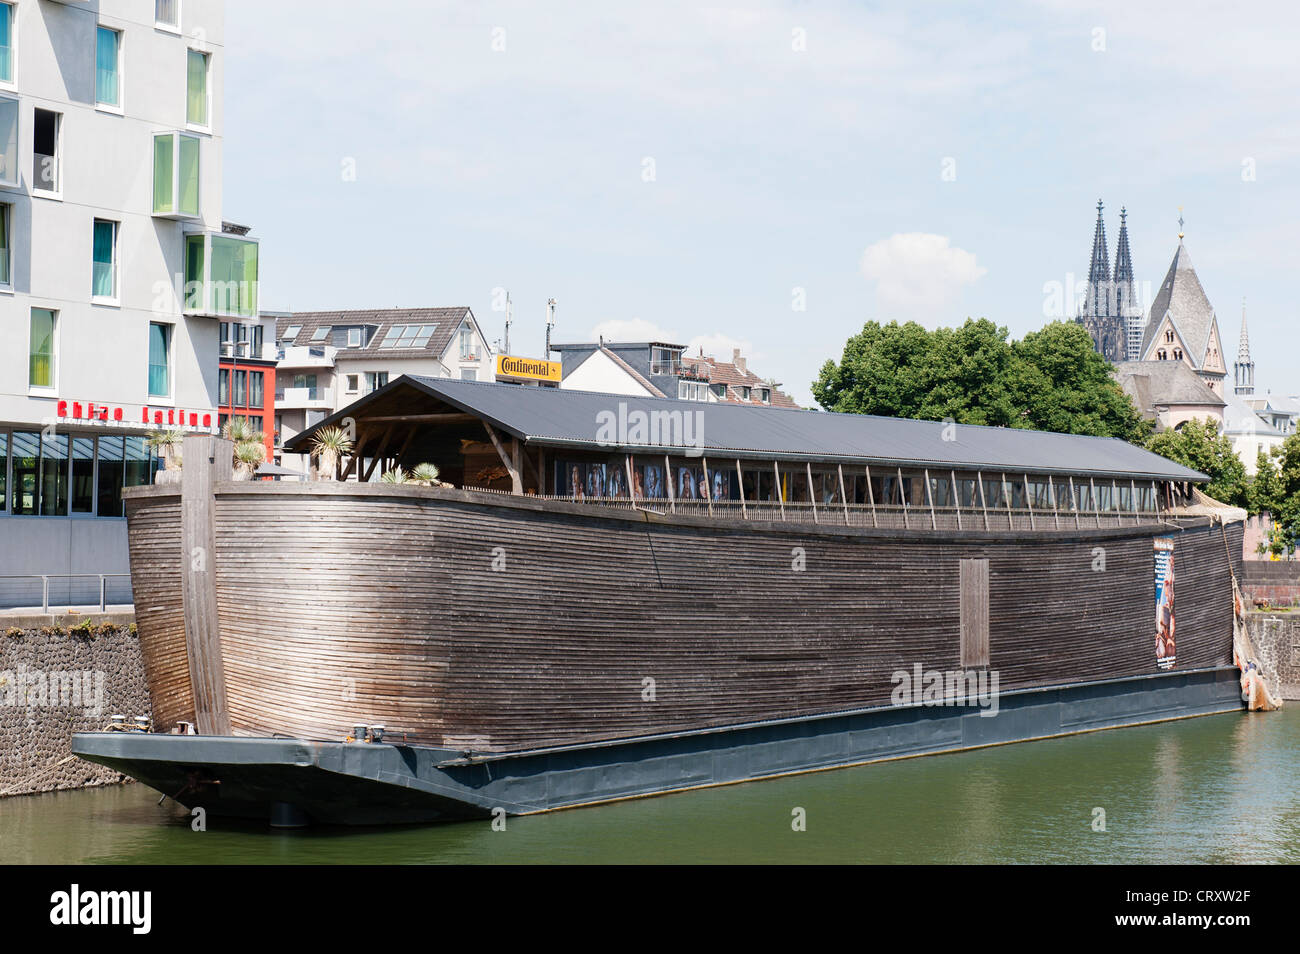 Exterior of Noah's Ark relligious tourist attraction in Rheinauhafen district of Cologne Germany Stock Photo